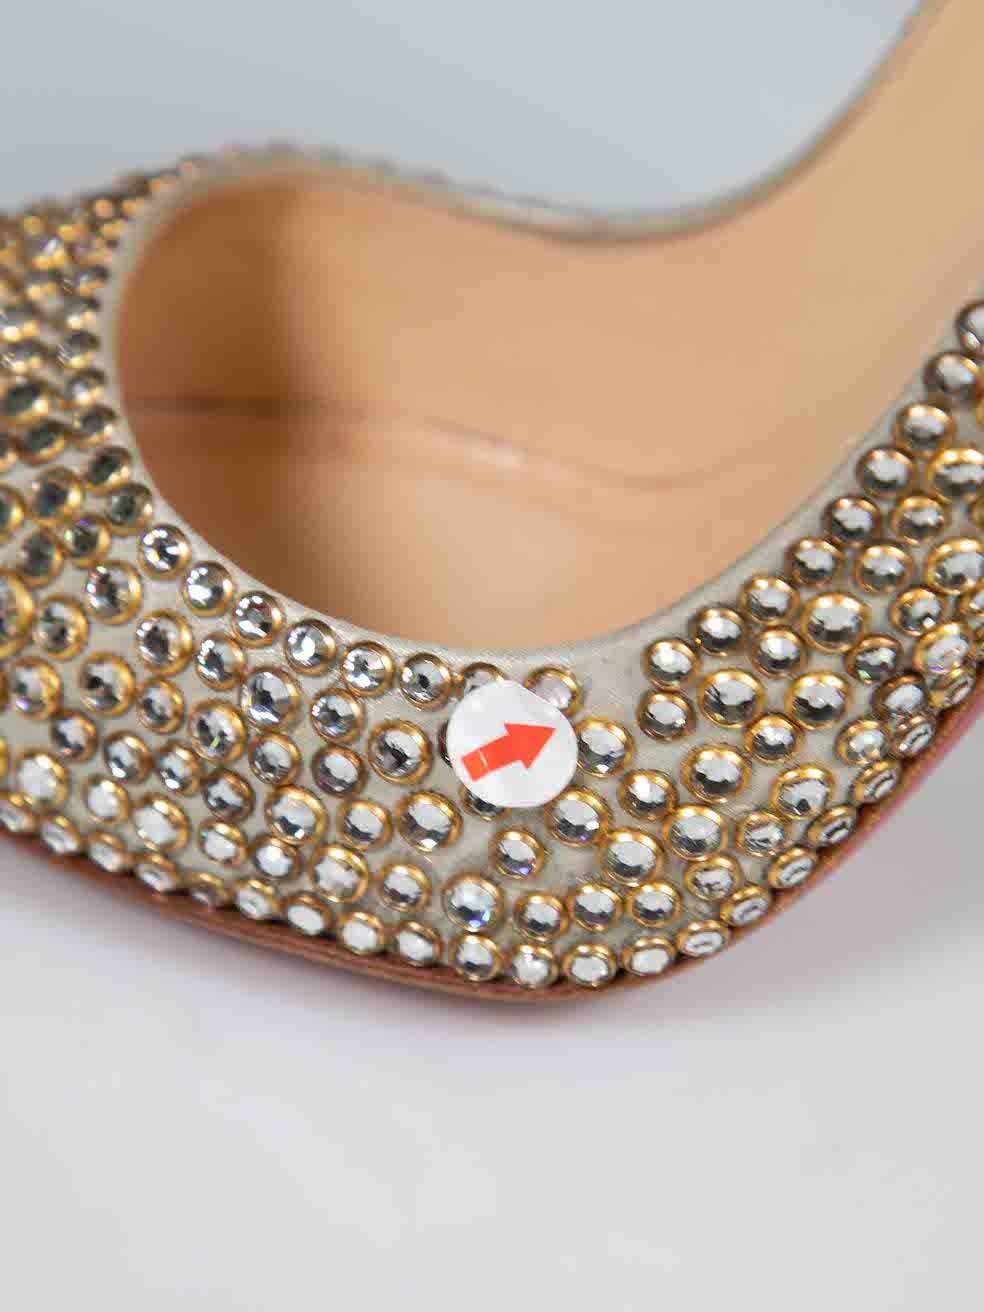 Christian Louboutin Metallic Leather Strass 120 Pigalle Follies Heels IT 38.5 For Sale 3